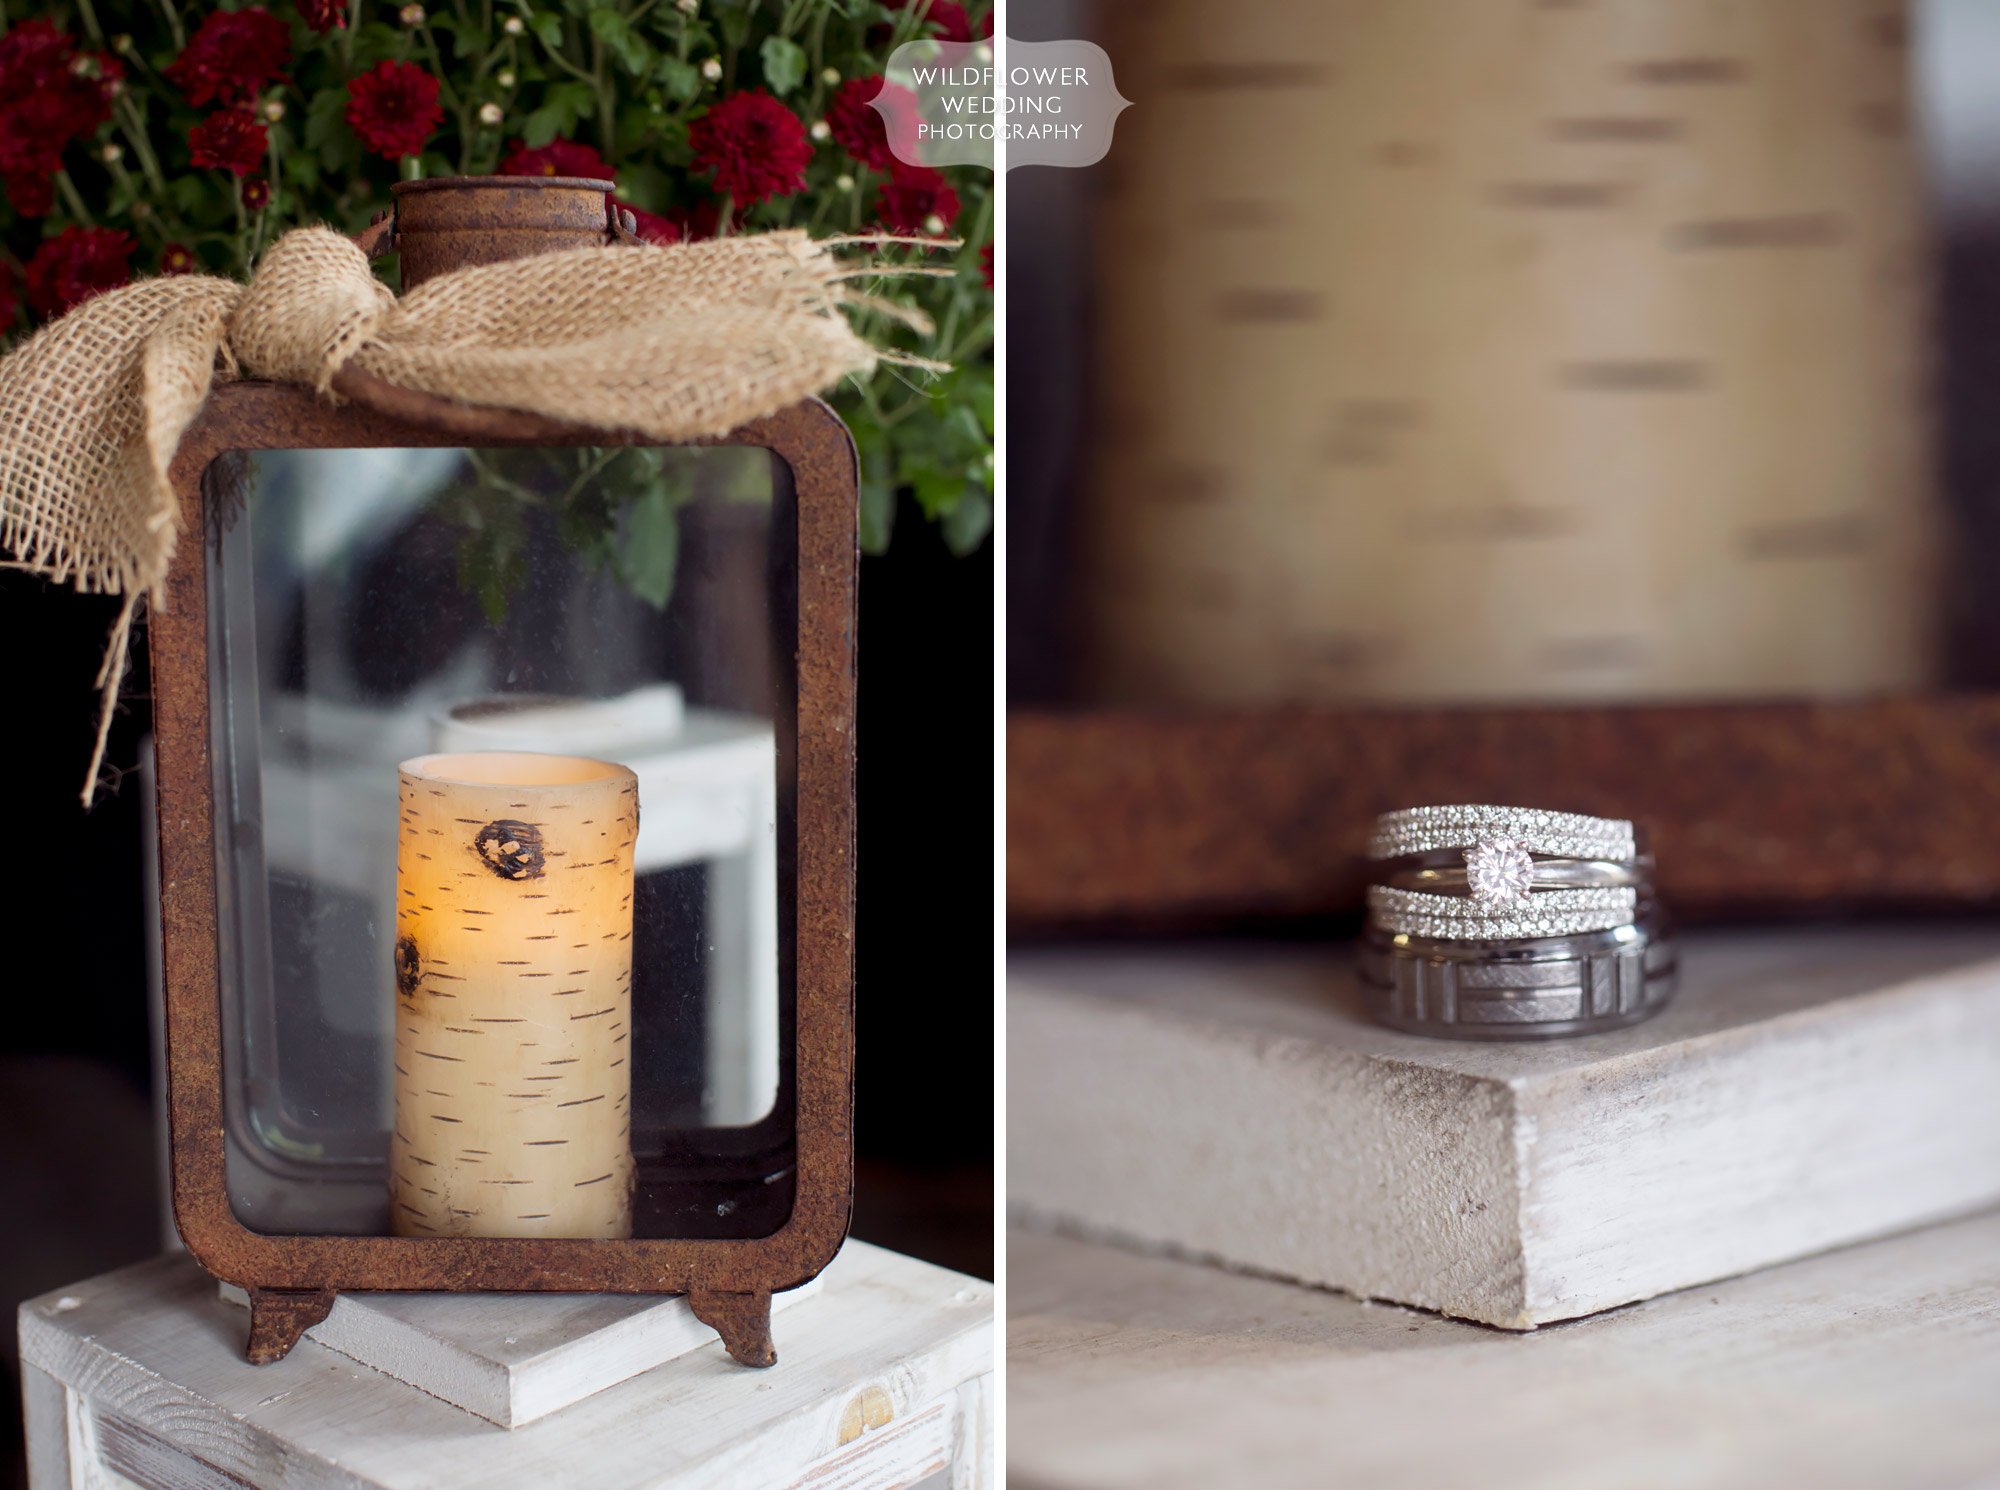 Rustic wedding decor with the wedding rings in Fulton, MO.